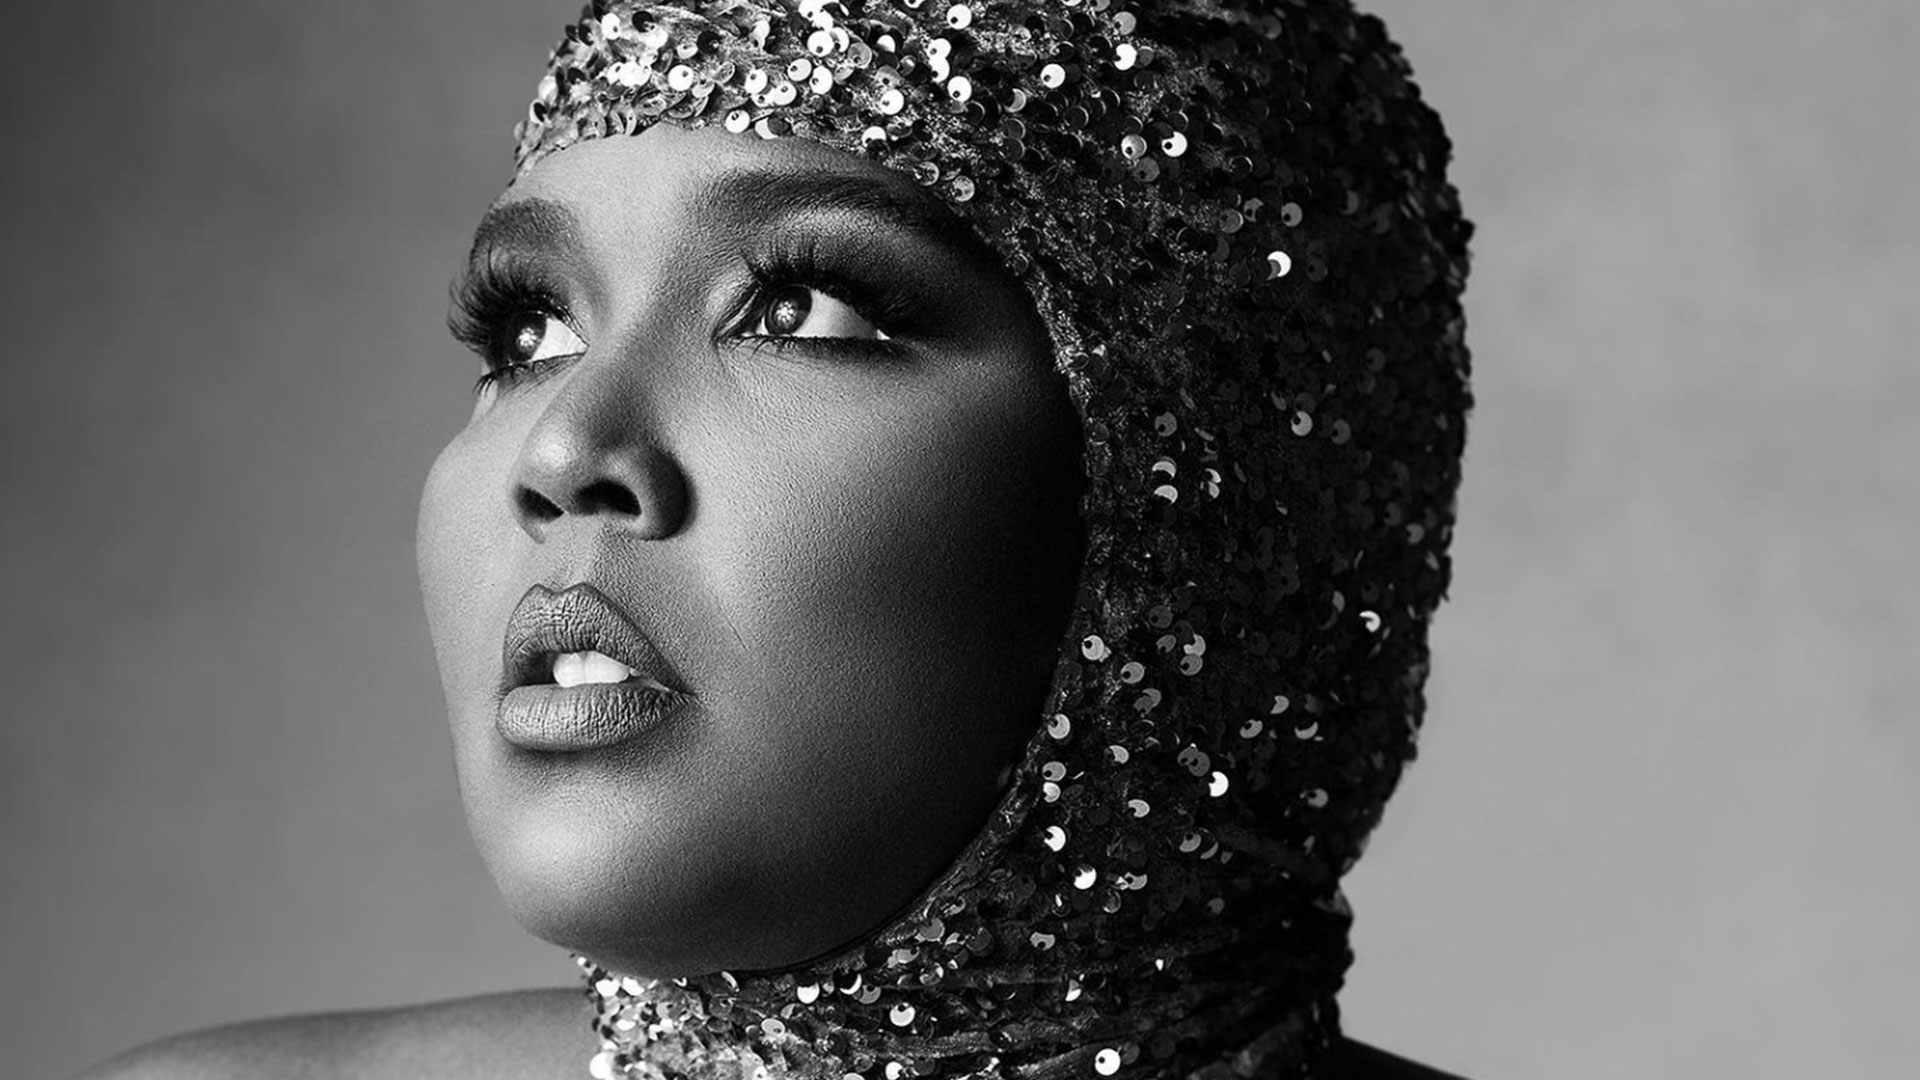 Part of Lizzo's album artwork for Special 